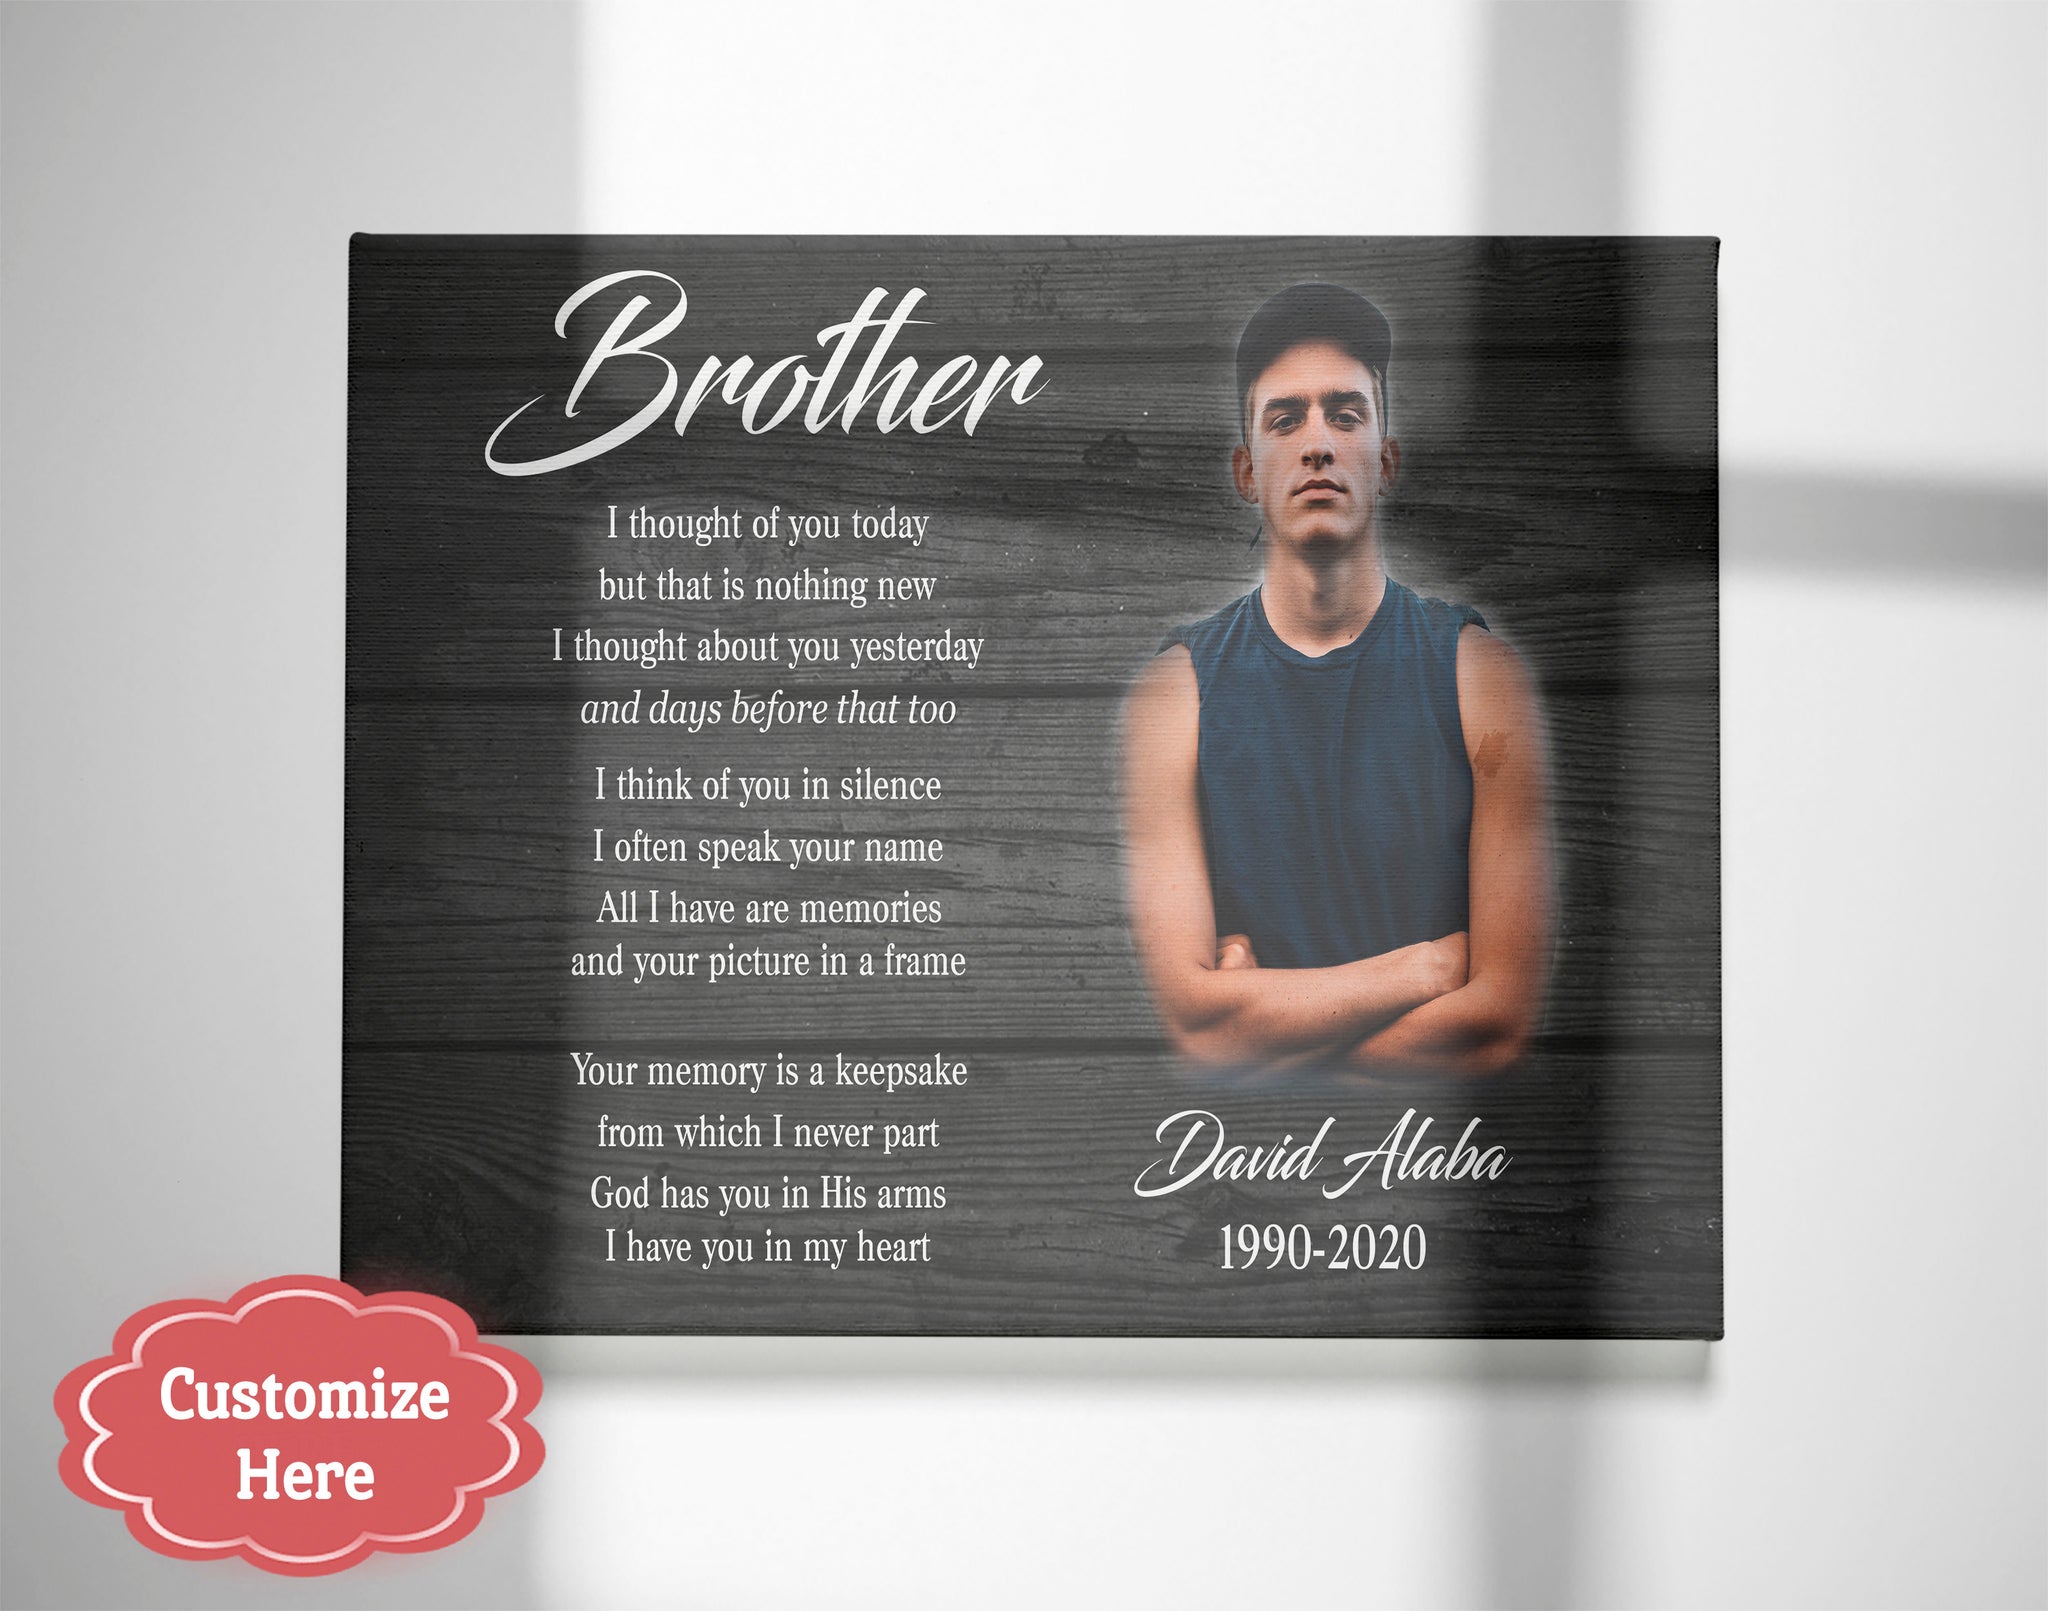 Brother Memorial Canvas - I Thought of You Today| Brother Memorial Gifts, Sympathy Gifts for Loss of Brother, Bereavement Condolence for Brother in Memory| N2415